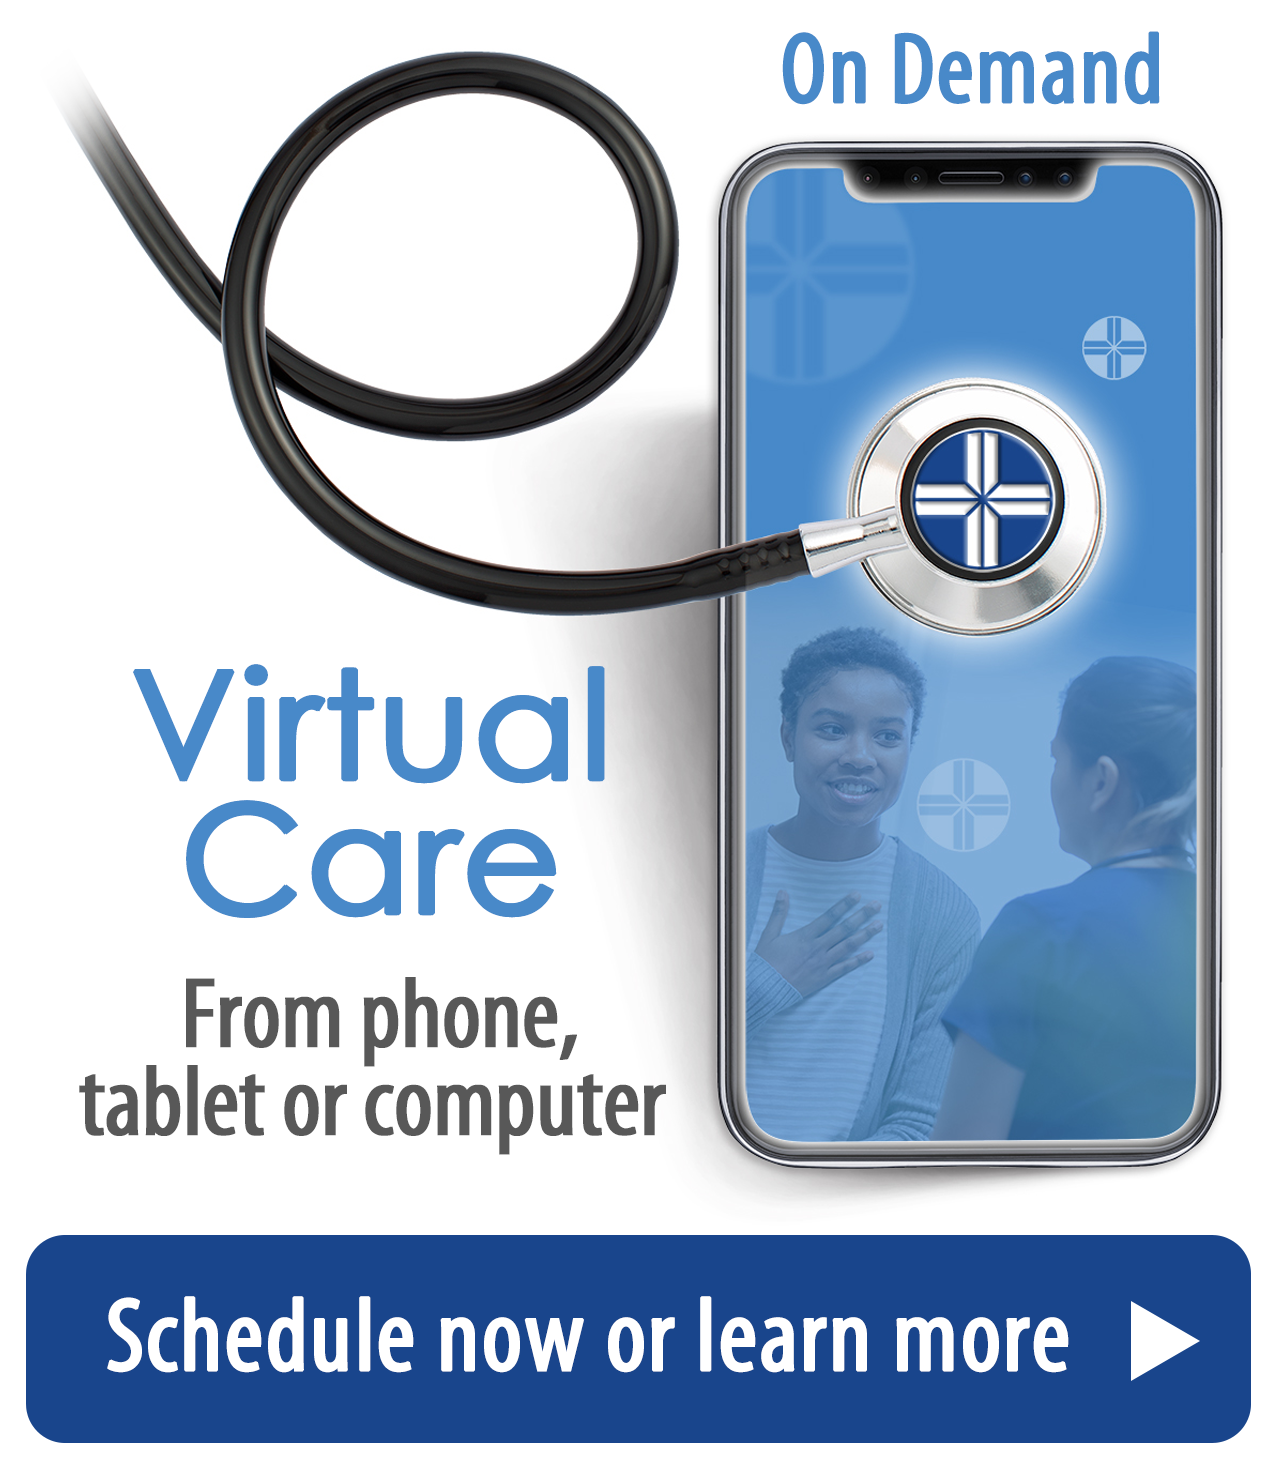 Click to learn more about scheduling a convenient On Demand Virtual Healthcare visit